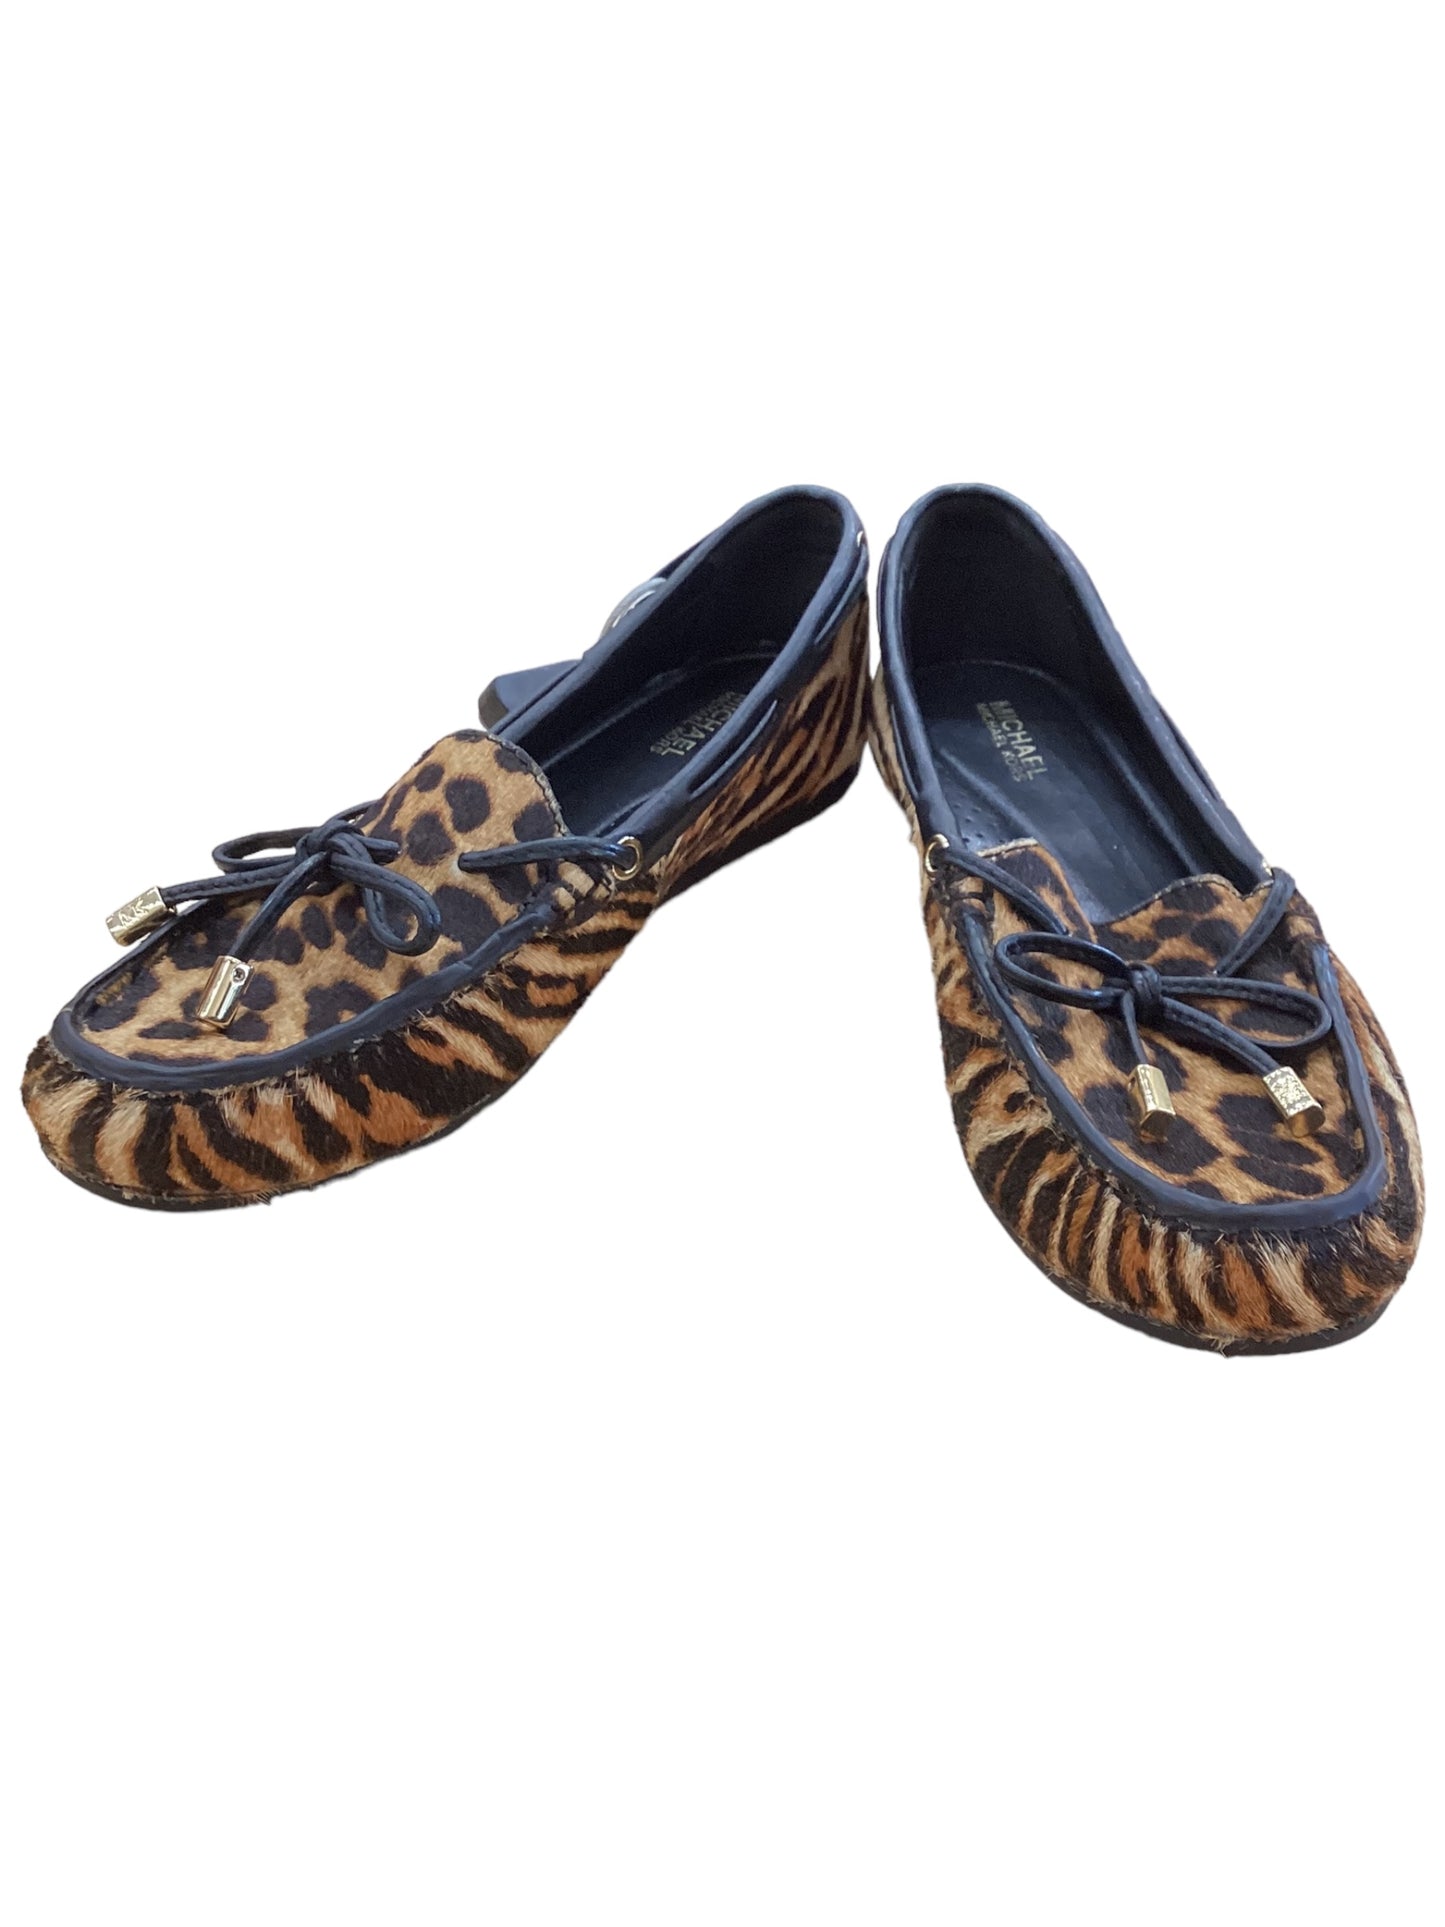 Shoes Flats Loafer Oxford By Michael Kors  Size: 6.5